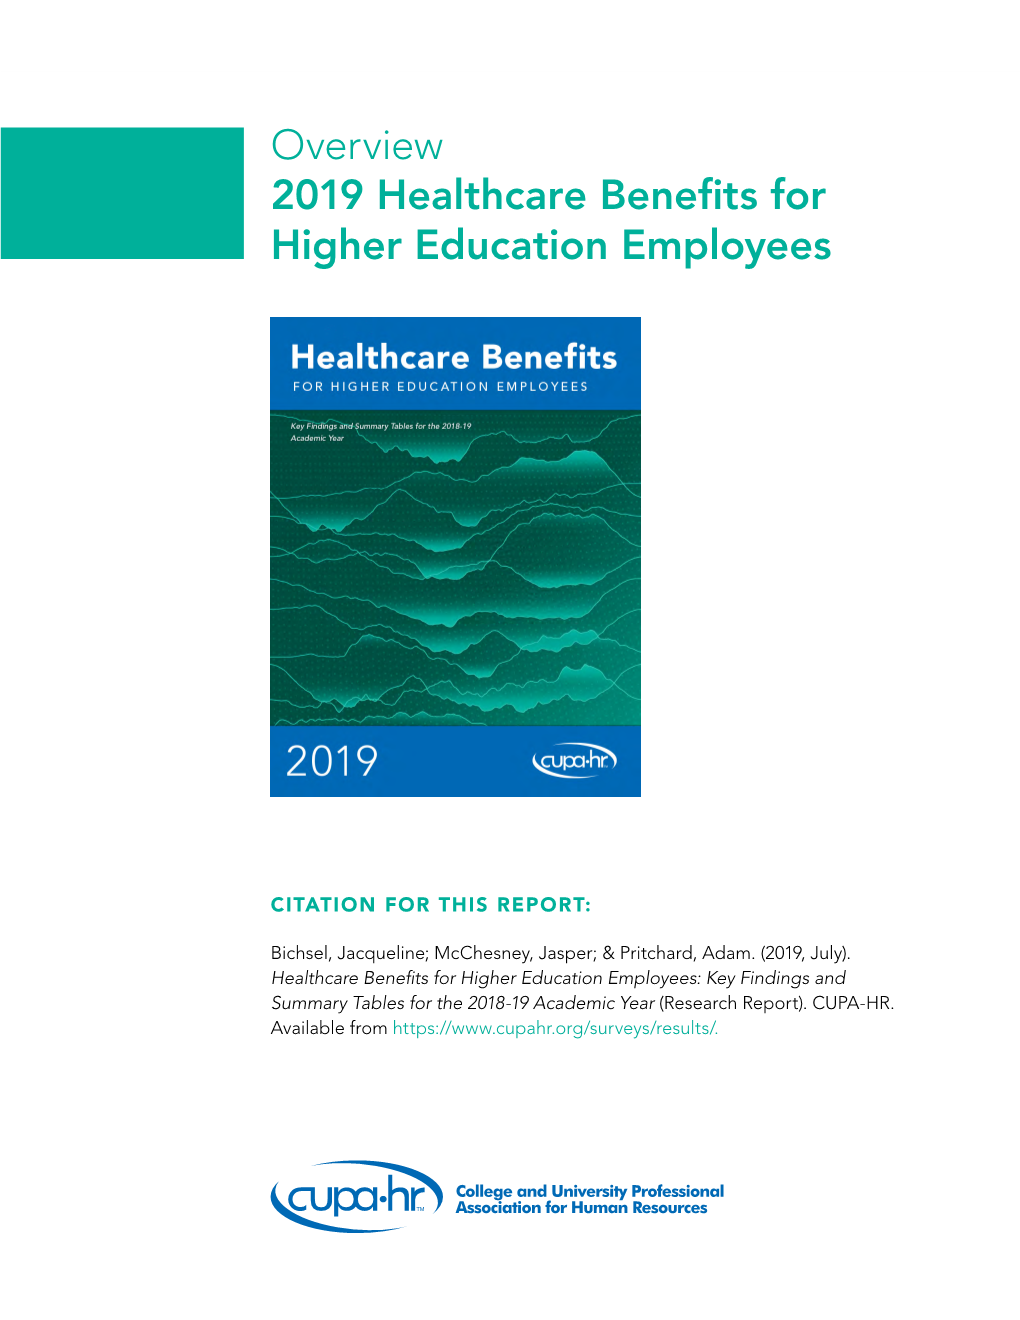 Overview 2019 Healthcare Benefits for Higher Education Employees